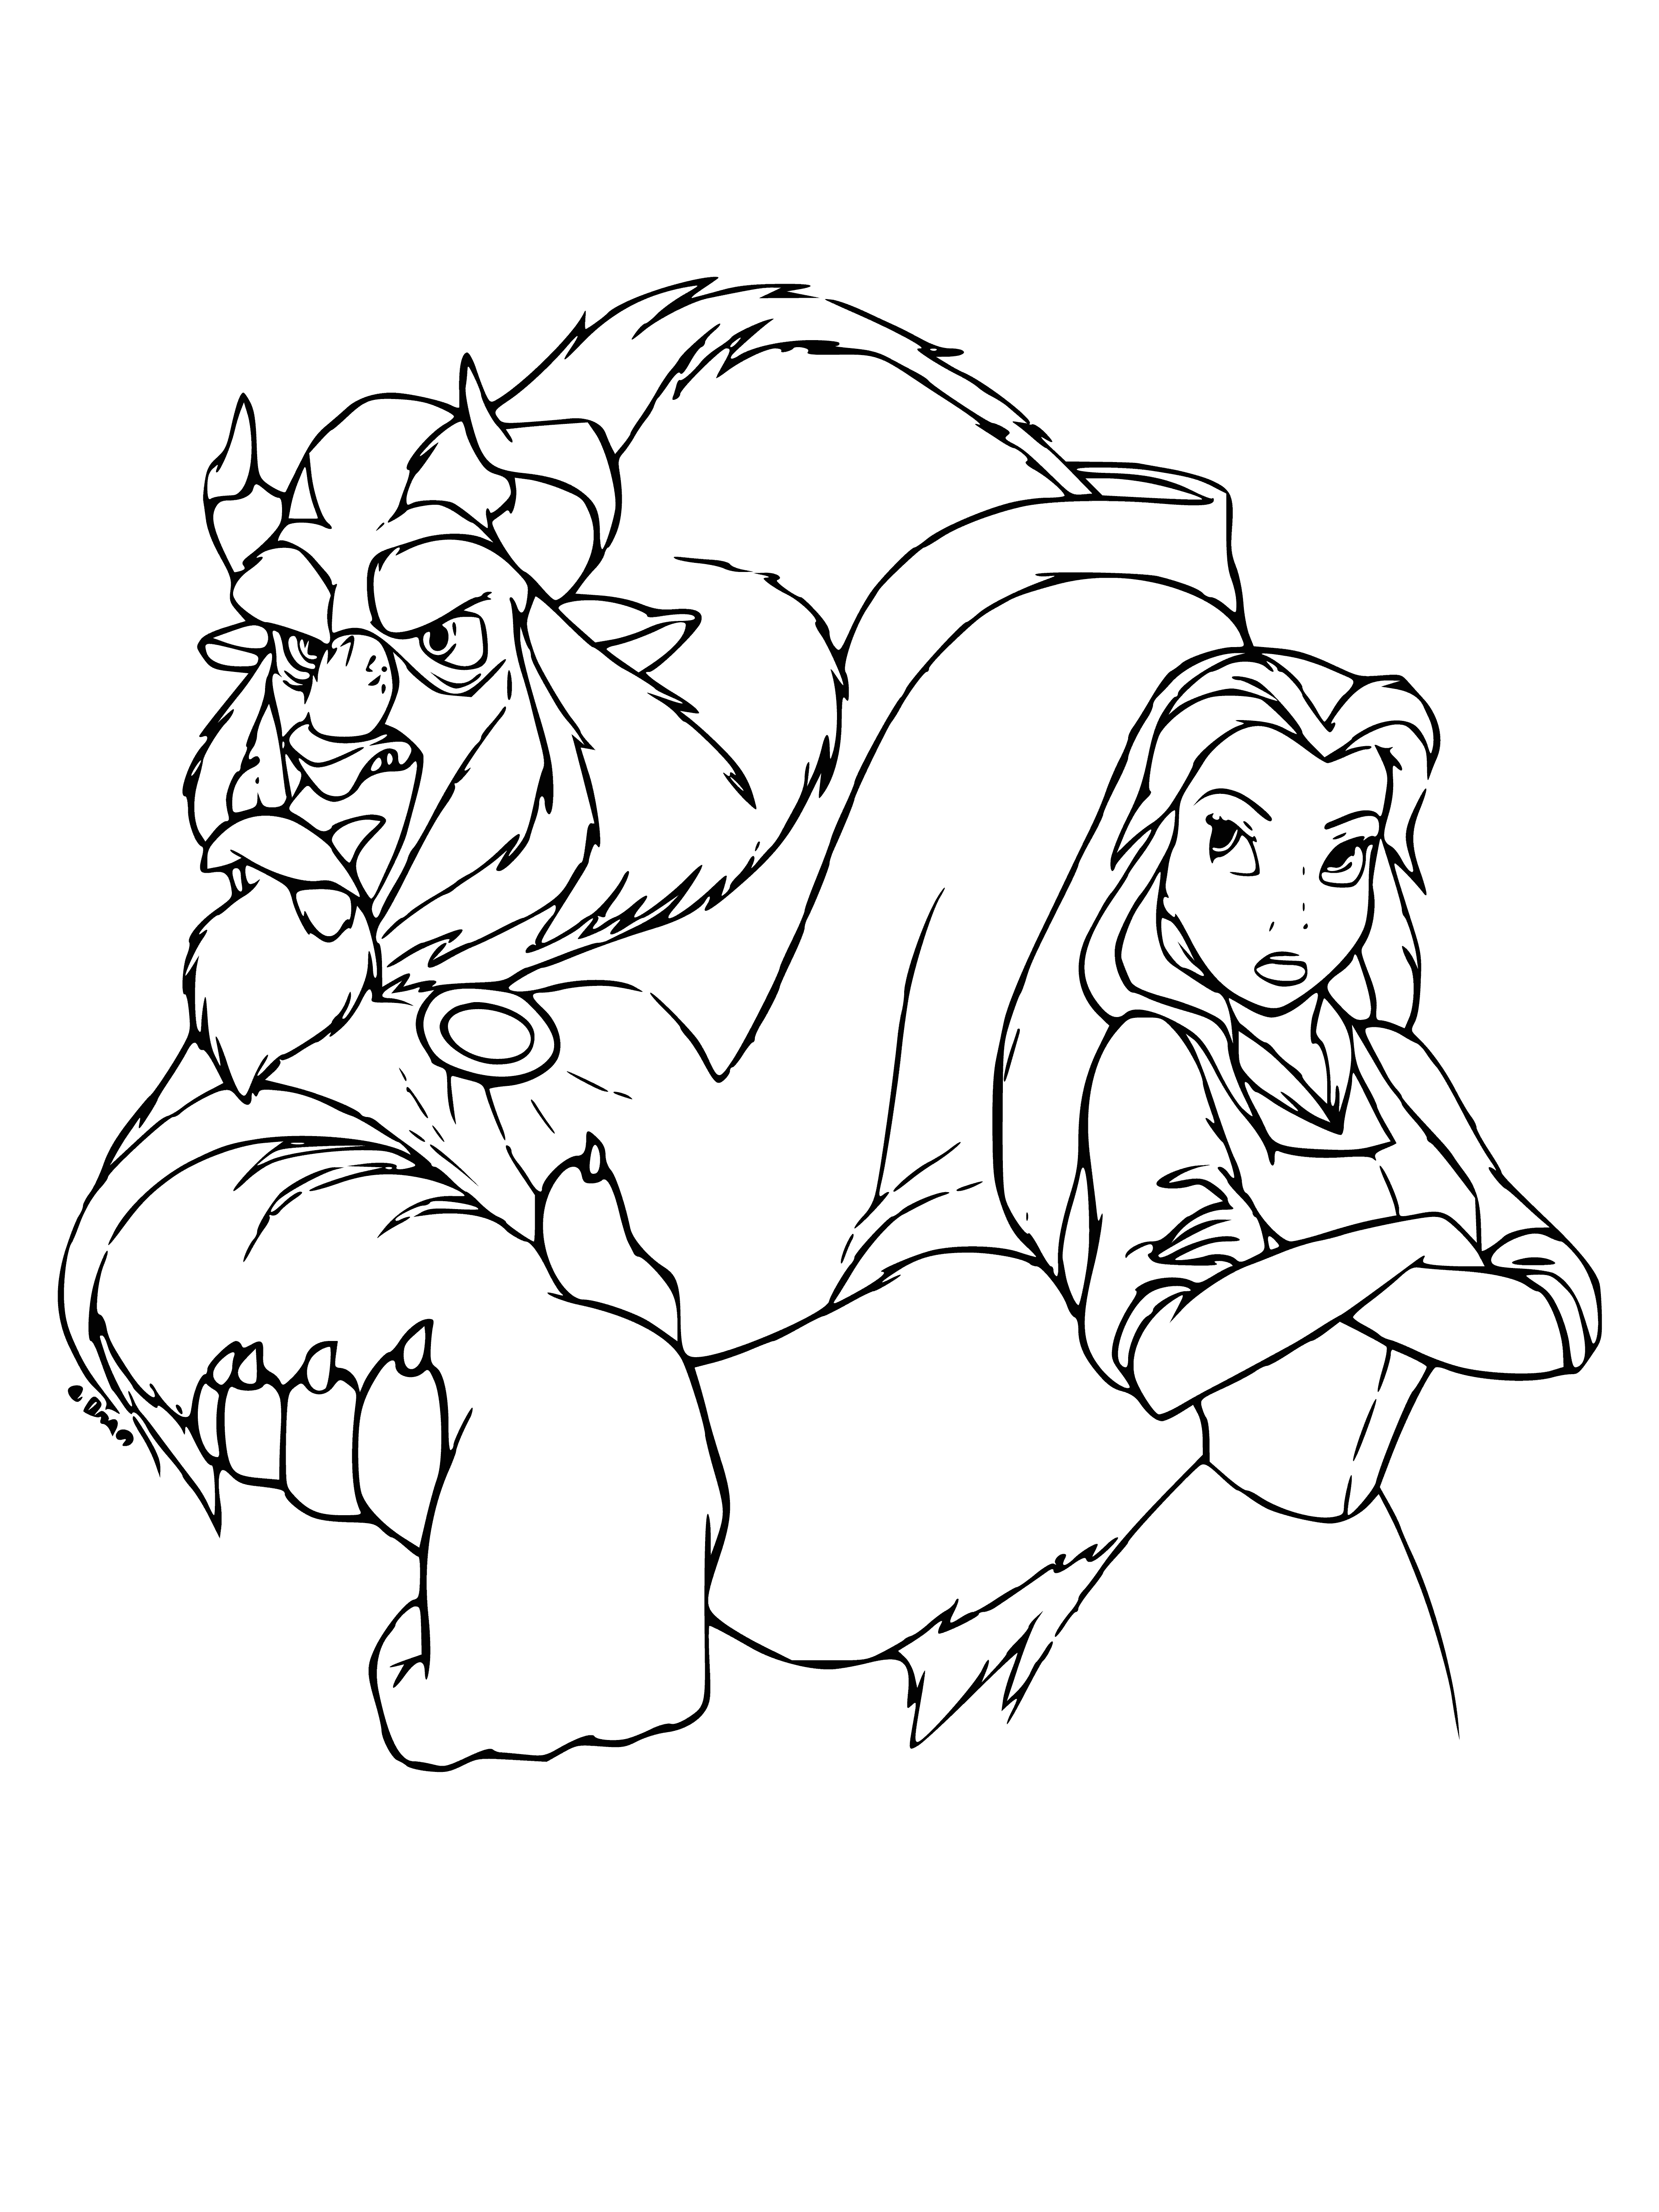 The beauty and the Beast coloring page